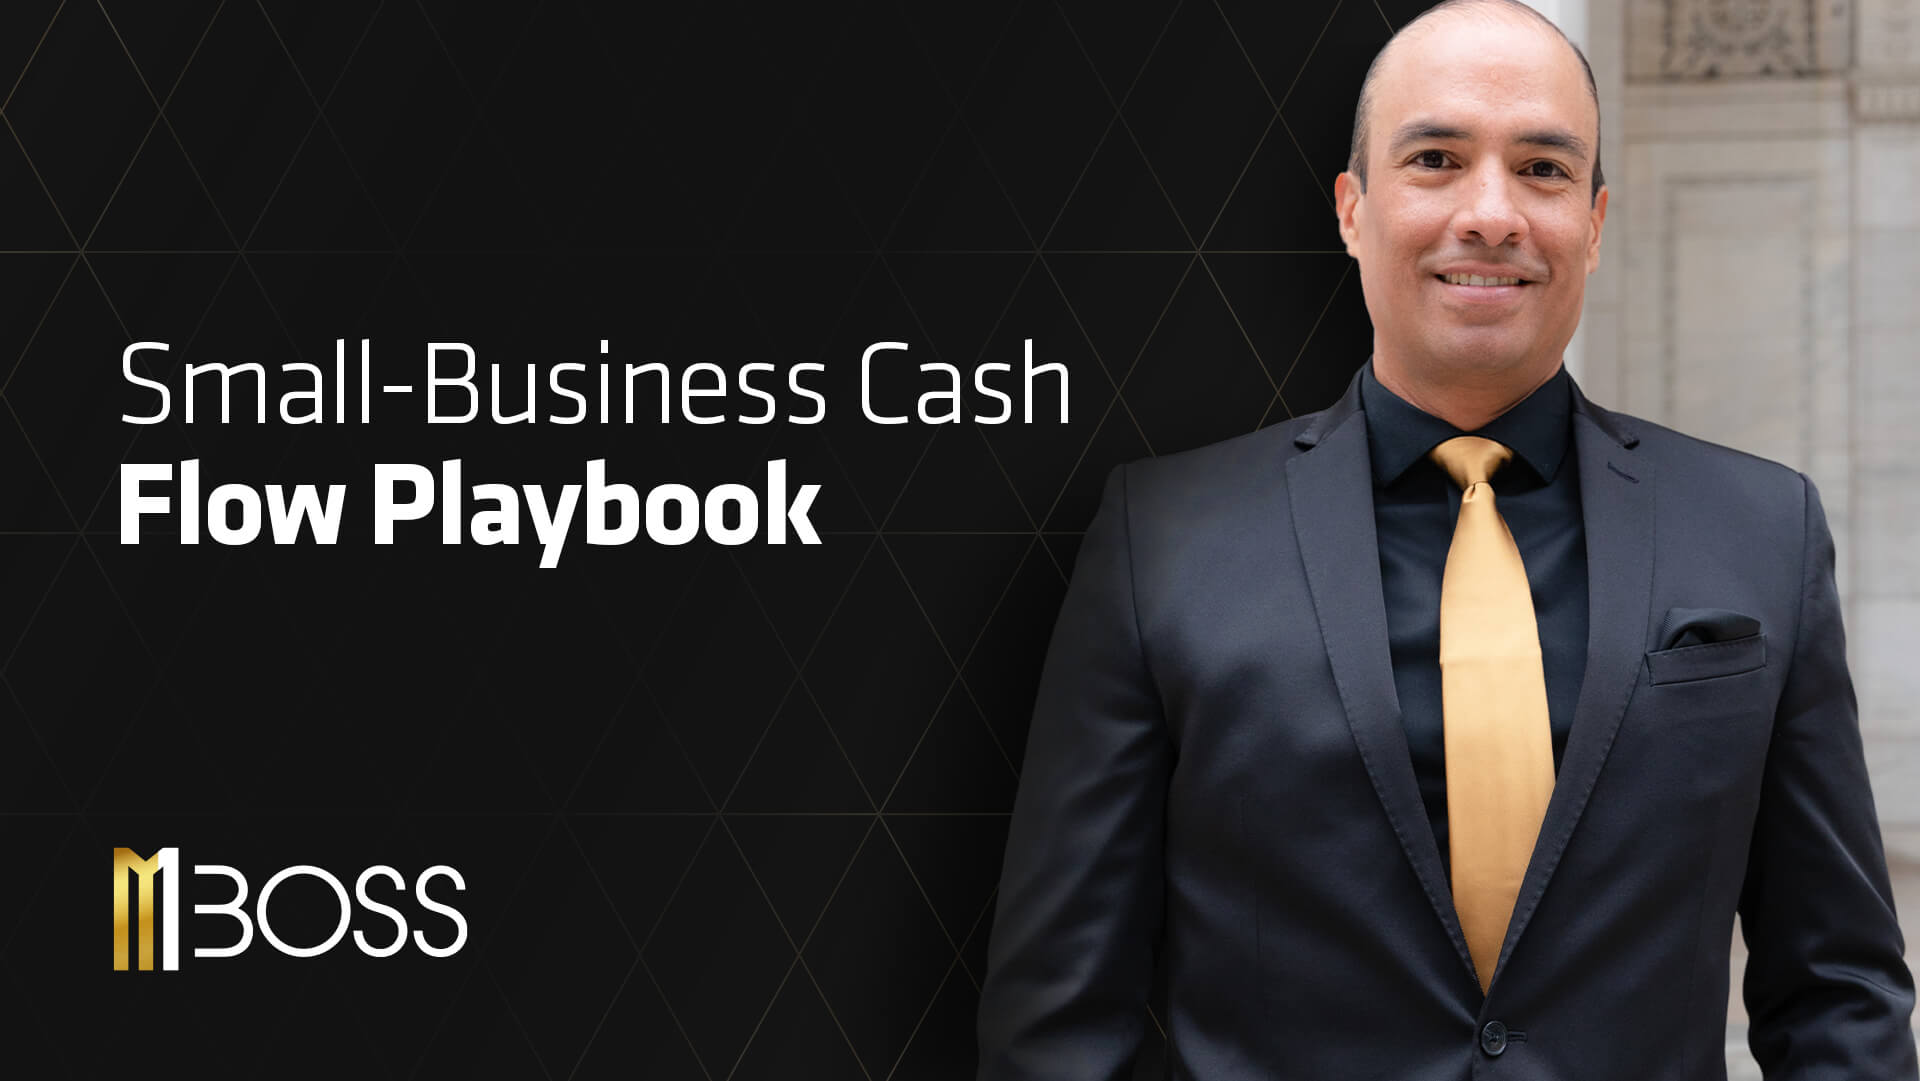 Cash Flow Statement and Playbook